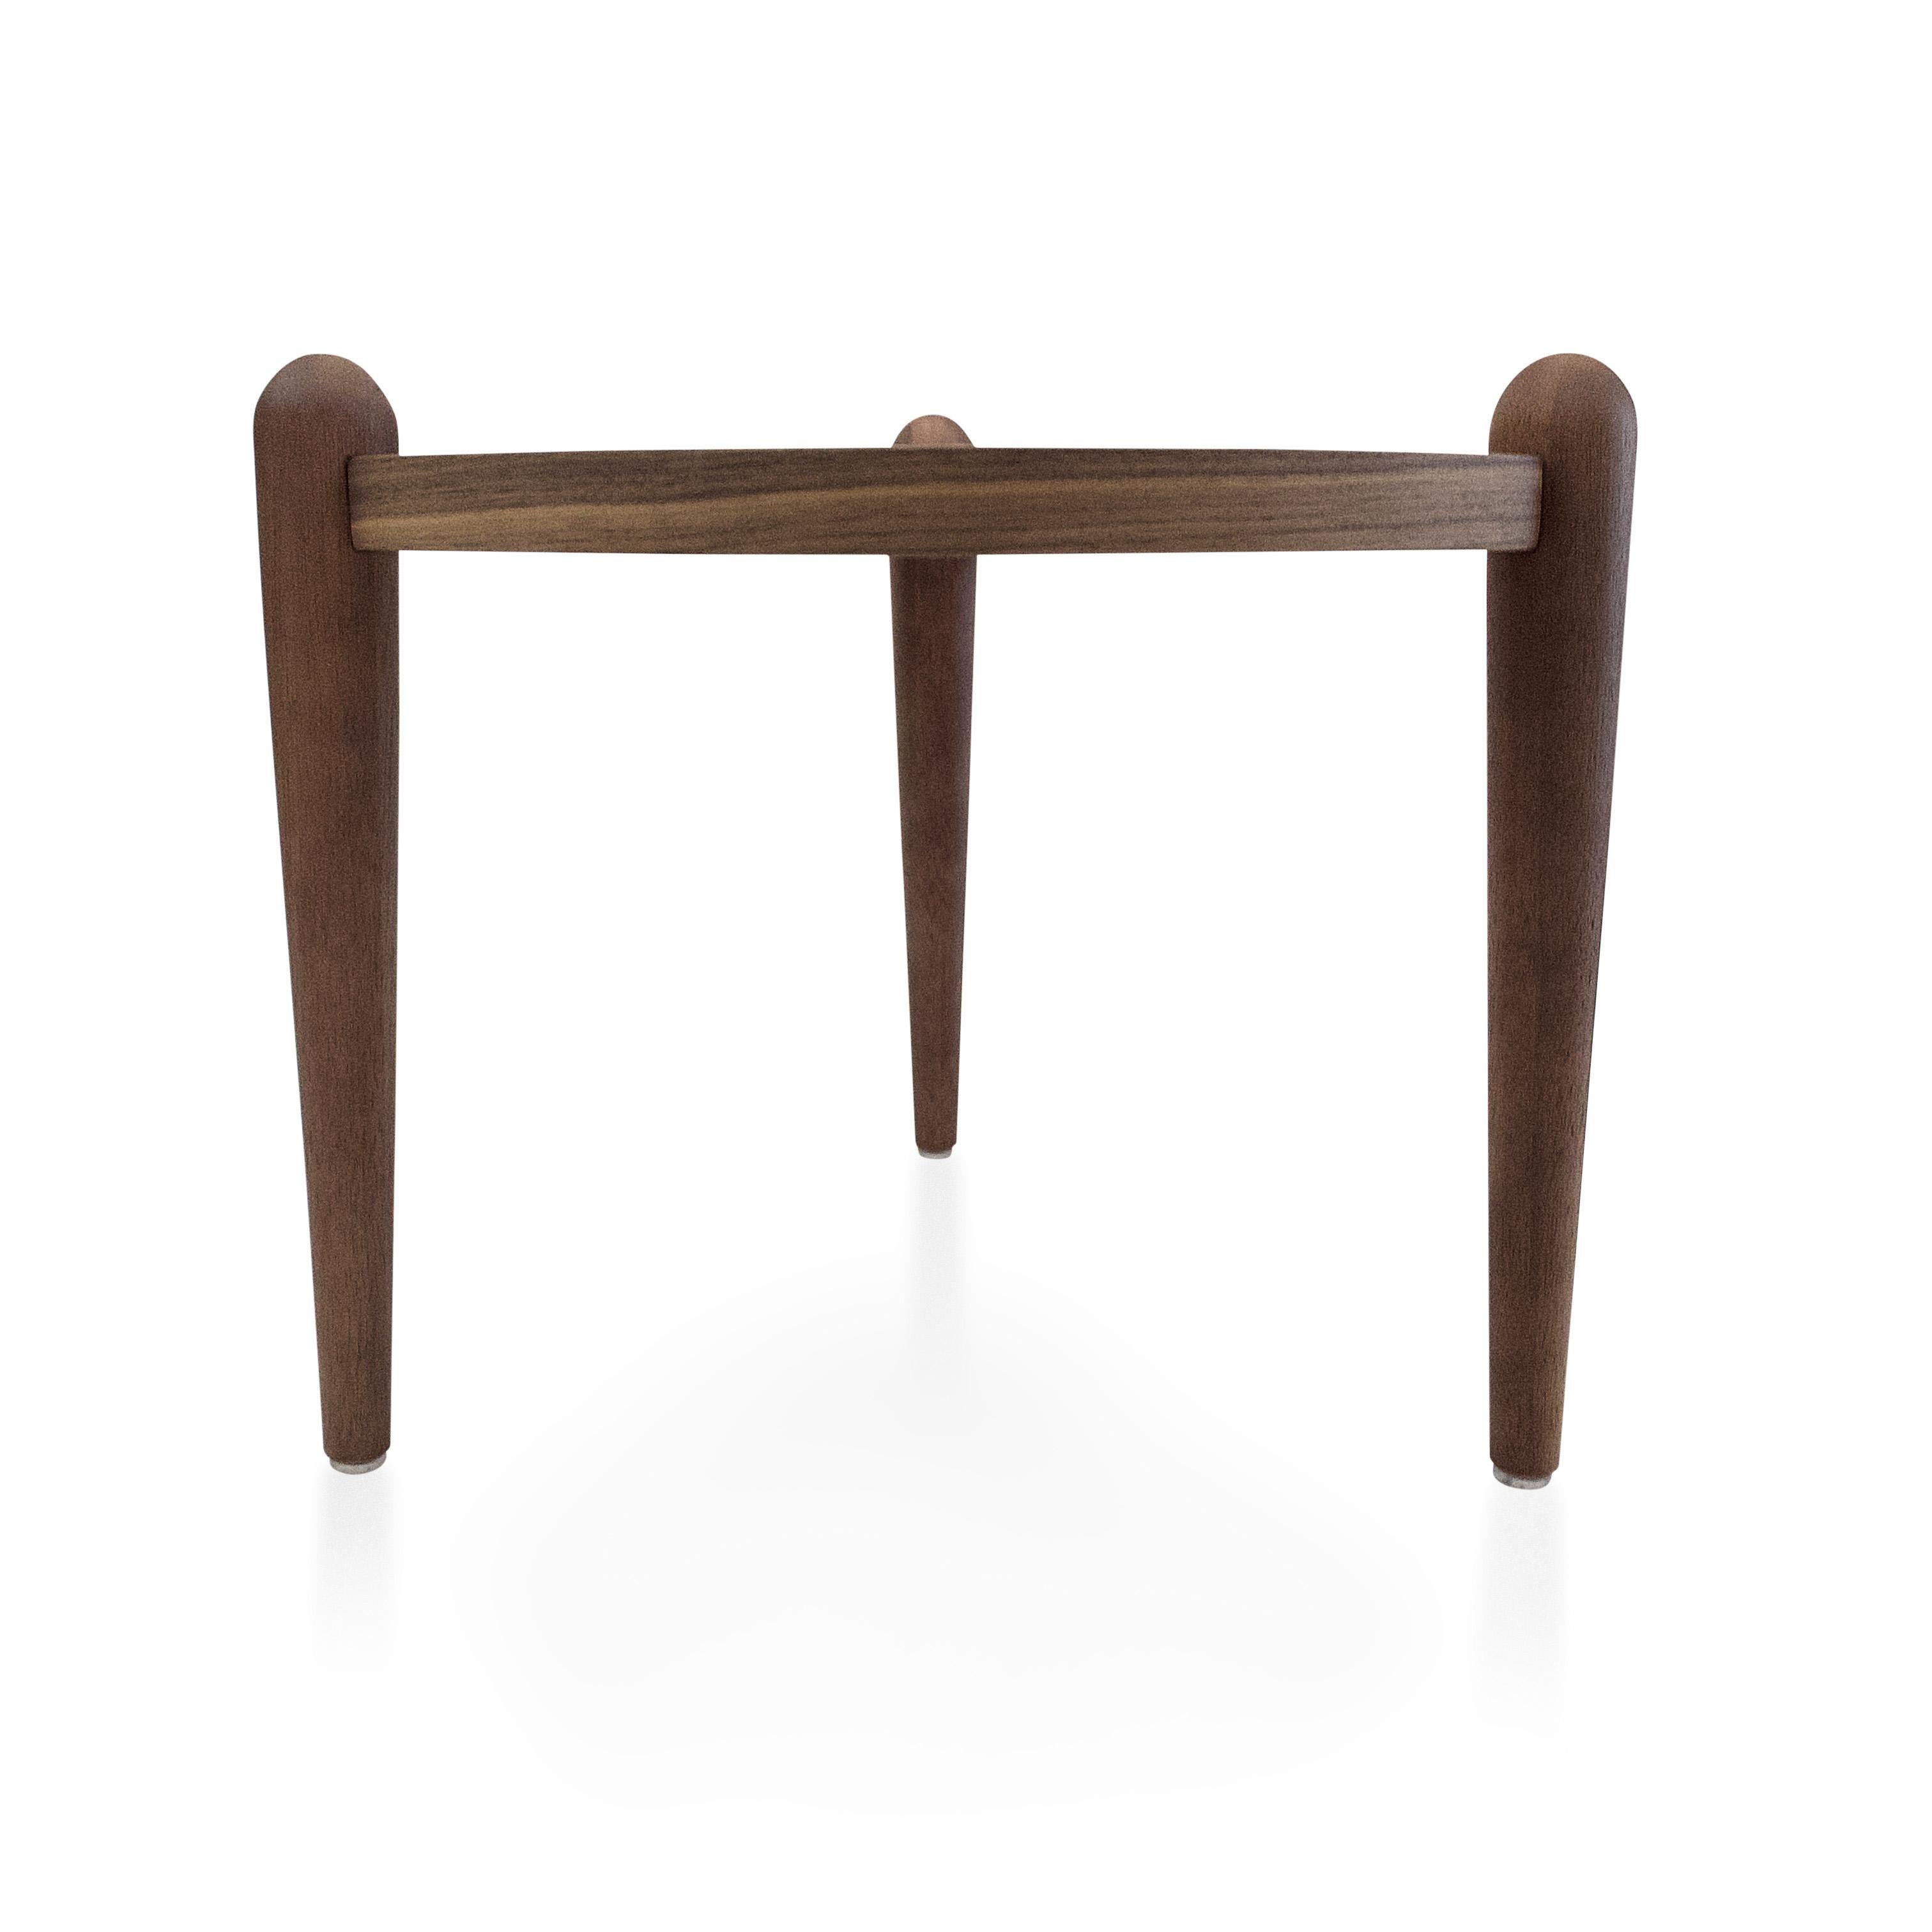 Pan Side Tables in Walnut Wood Finish, Set of 3 In New Condition For Sale In Miami, FL